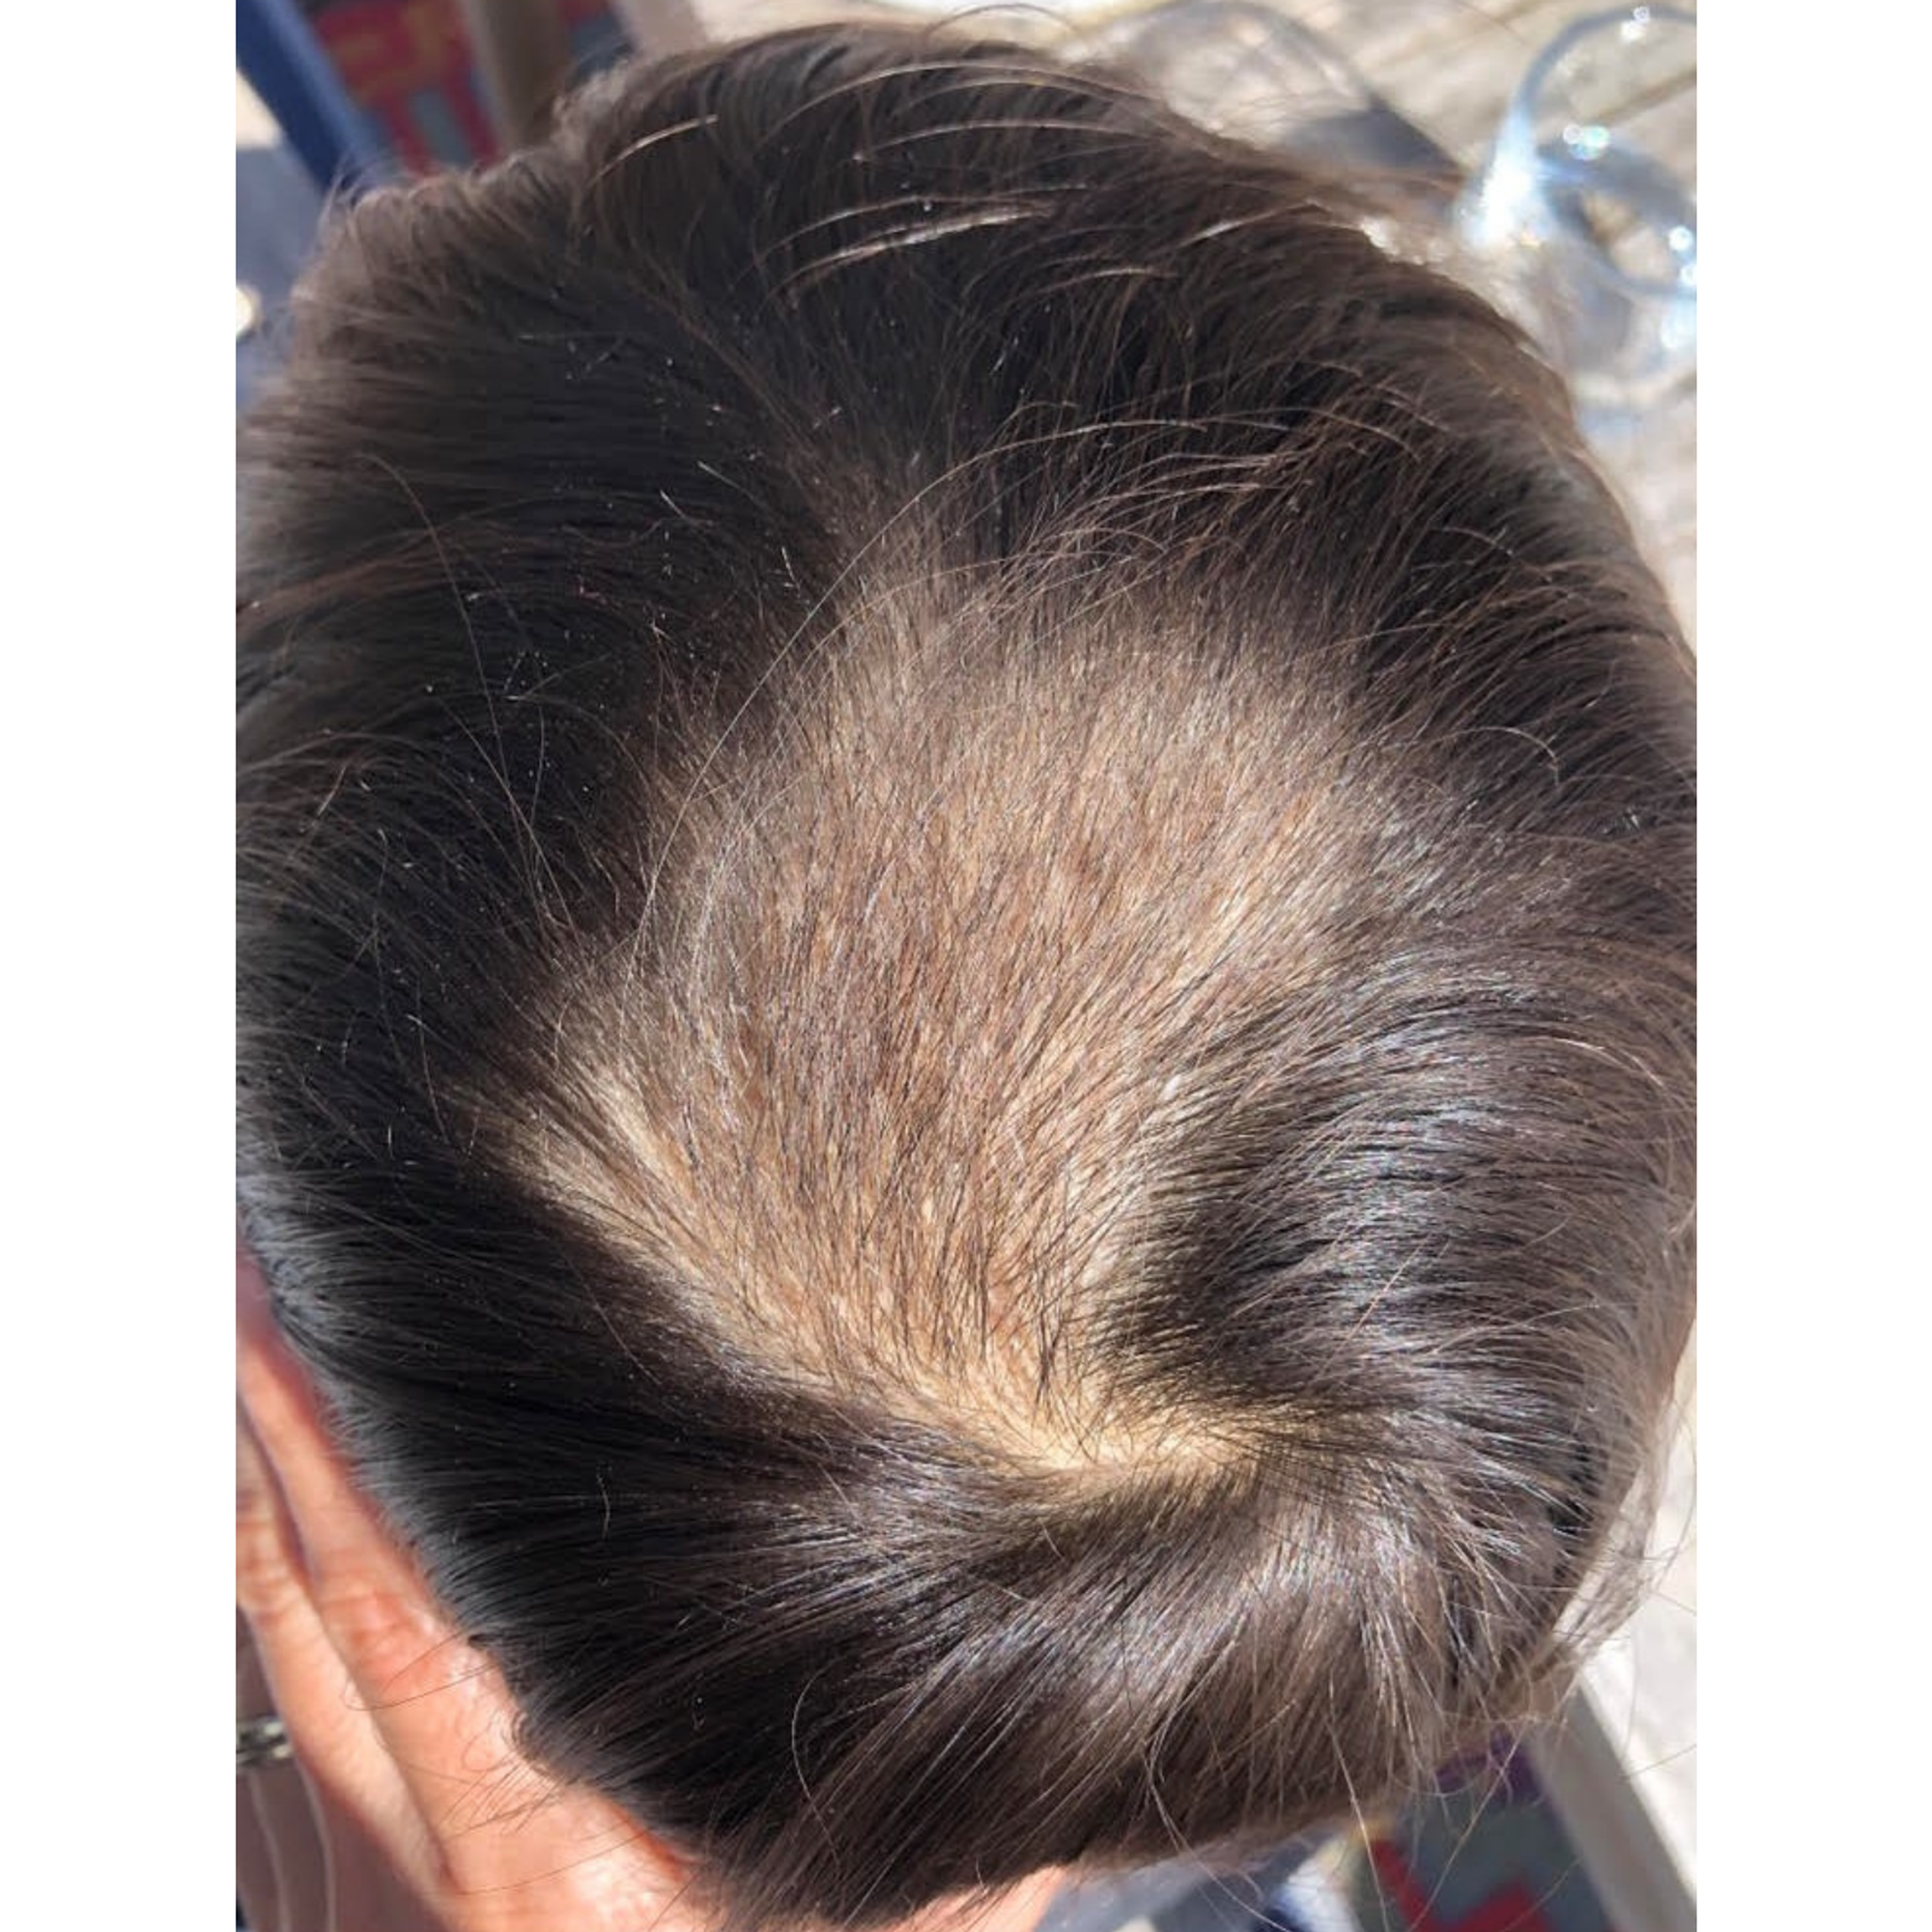 Cureus | Combined Diet and Supplementation Therapy Resolves Alopecia Areata  in a Paediatric Patient: A Case Study | Article